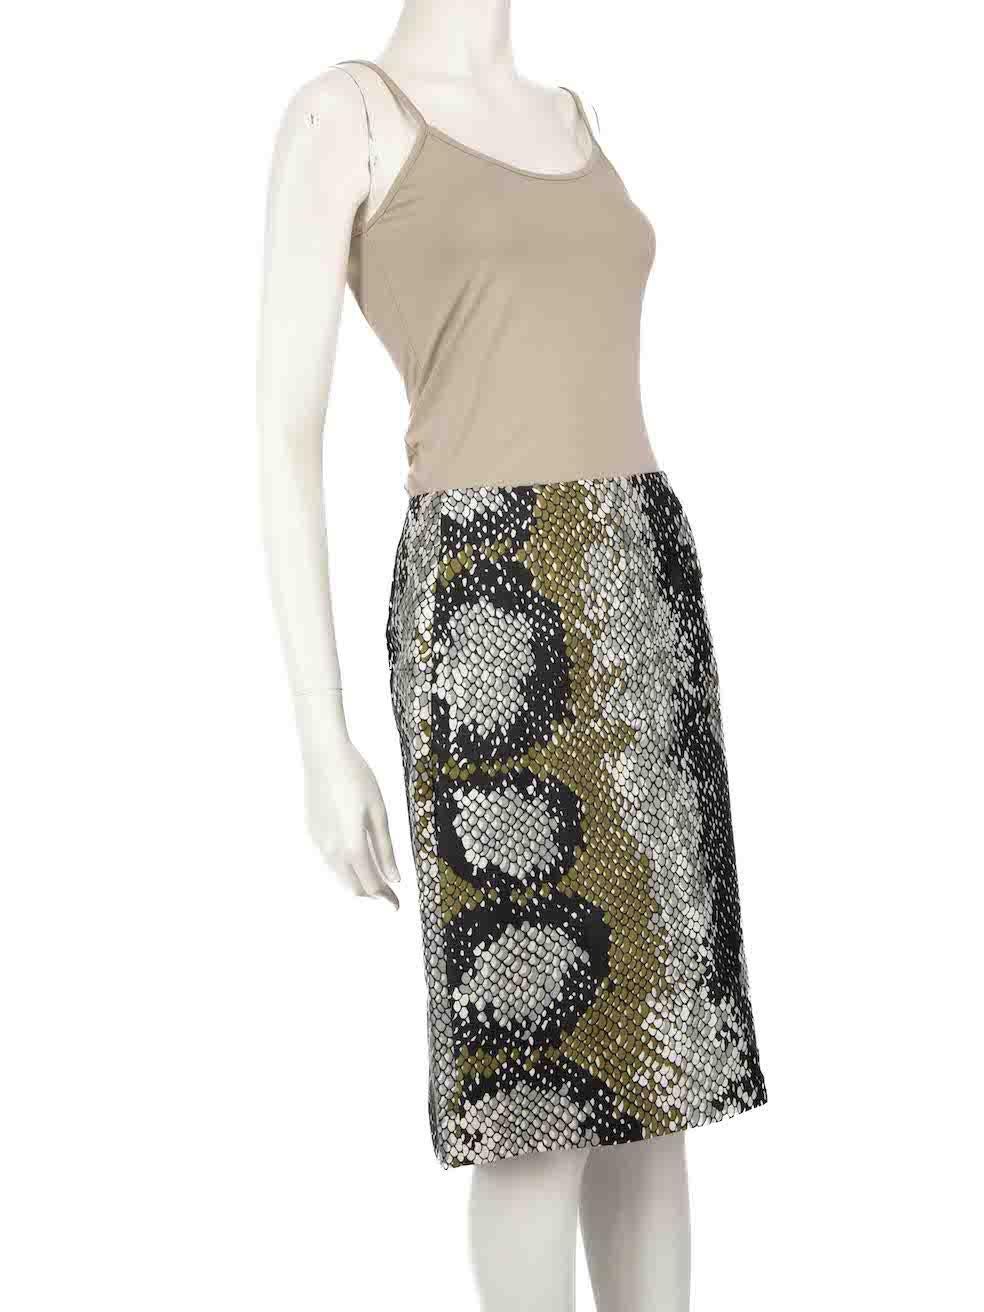 CONDITION is Very good. Hardly any visible wear to skirt is evident on this used Prada designer resale item.
 
 
 
 Details
 
 
 Multicolour -Green/Black
 
 Wool
 
 Pencil skirt
 
 Knee length
 
 Snakeskin print pattern
 
 Side zip closure with hook